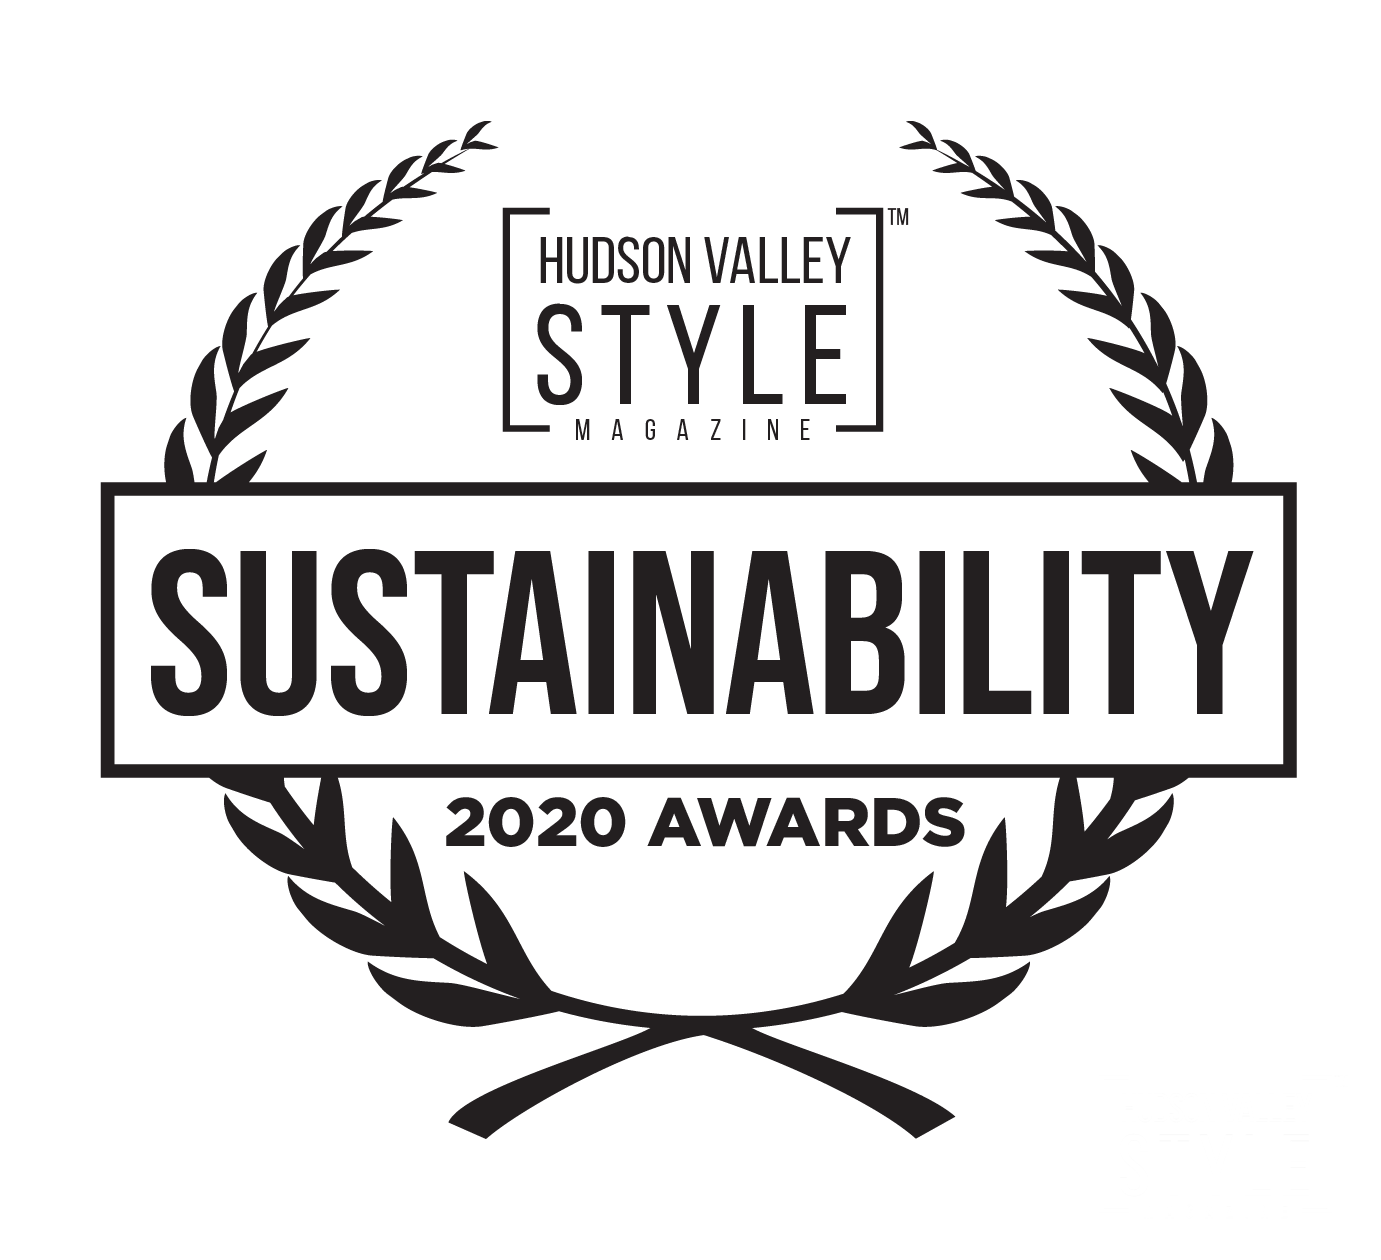 Hudson Valley Style Magazine 2020 Awards: Recognizing Outstanding Style, Design, Creativity, Innovation and Leadership Achievements while advancing Sustainable Design and Social Responsibility Principles in the Greater Hudson Valley Region and all around the World.